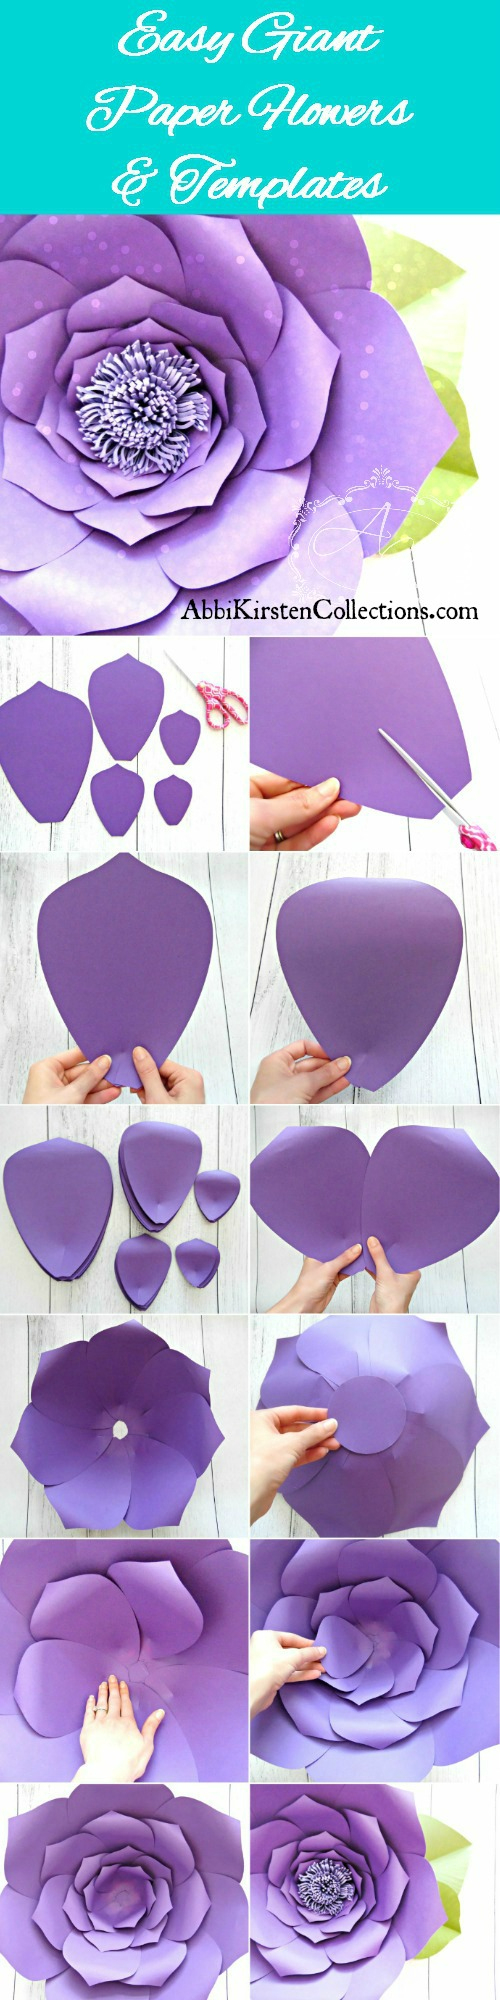 Free Flower Template: How To Make Large Paper Flowers - Free Printable Large Paper Rose Template